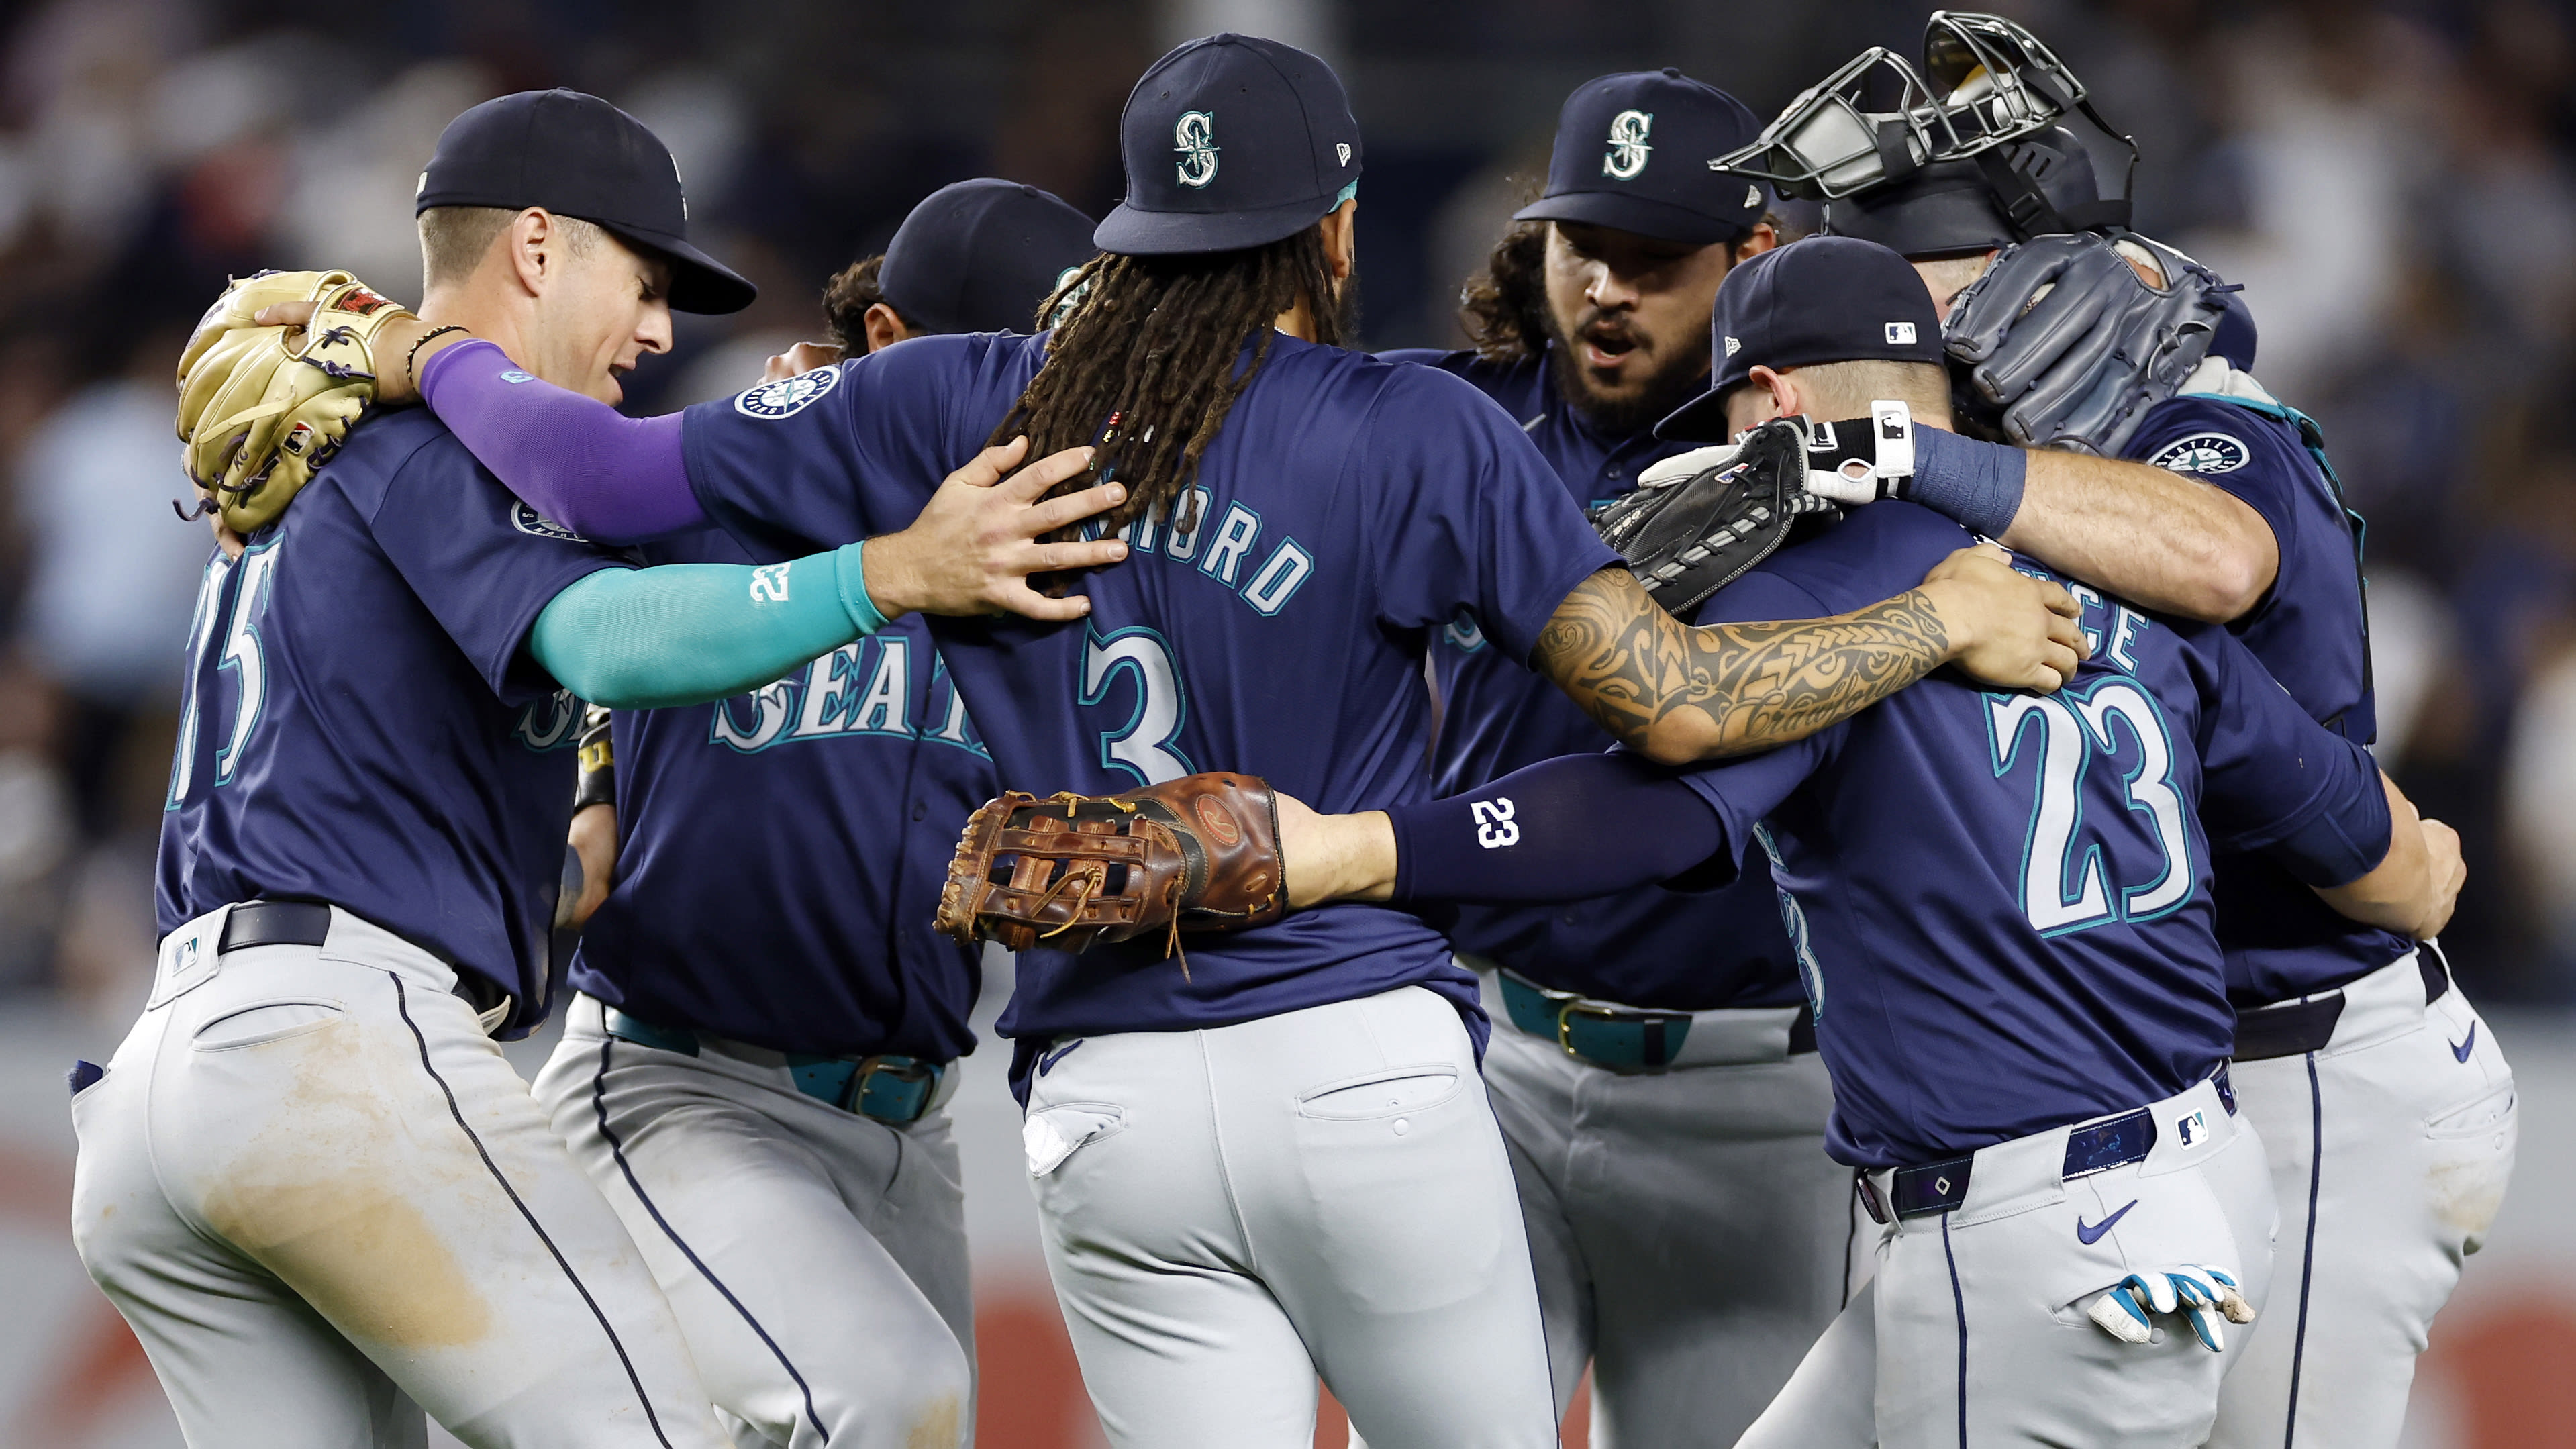 The Mariners celebrate after a walk-off win